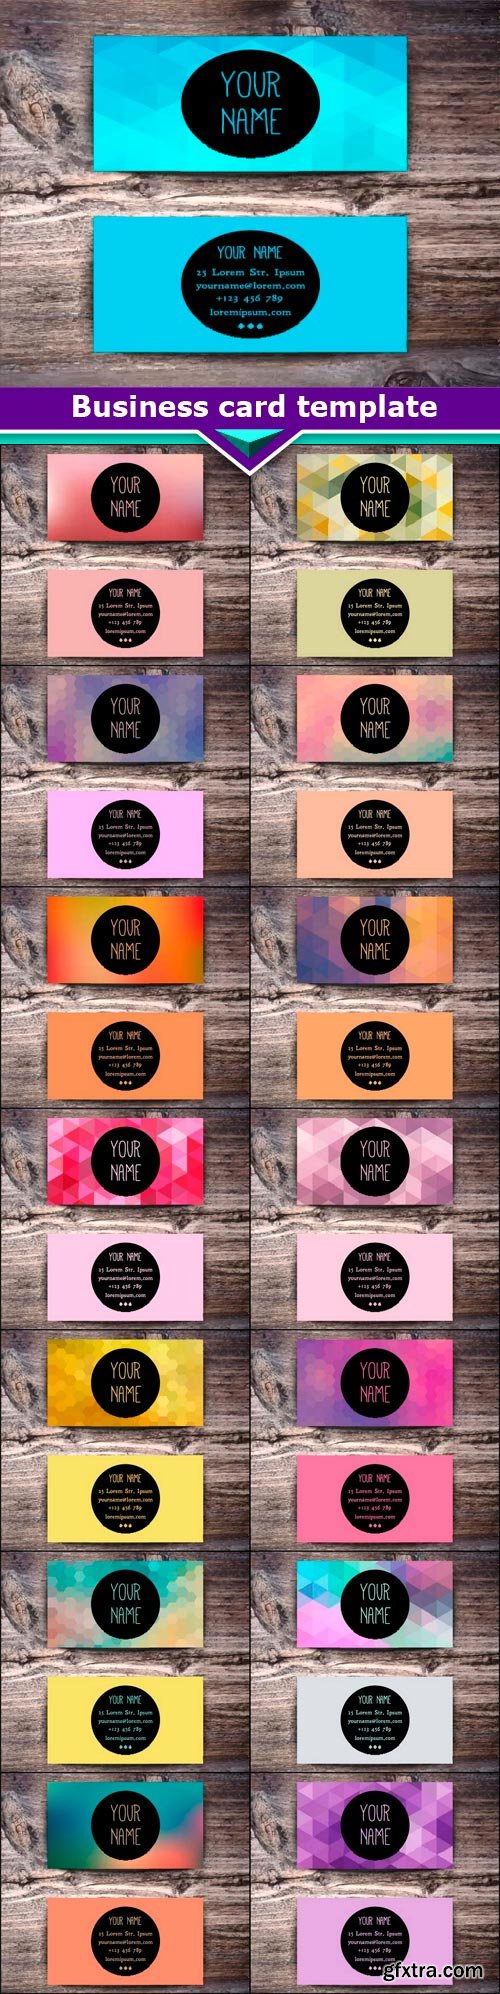 Business card template 15x EPS